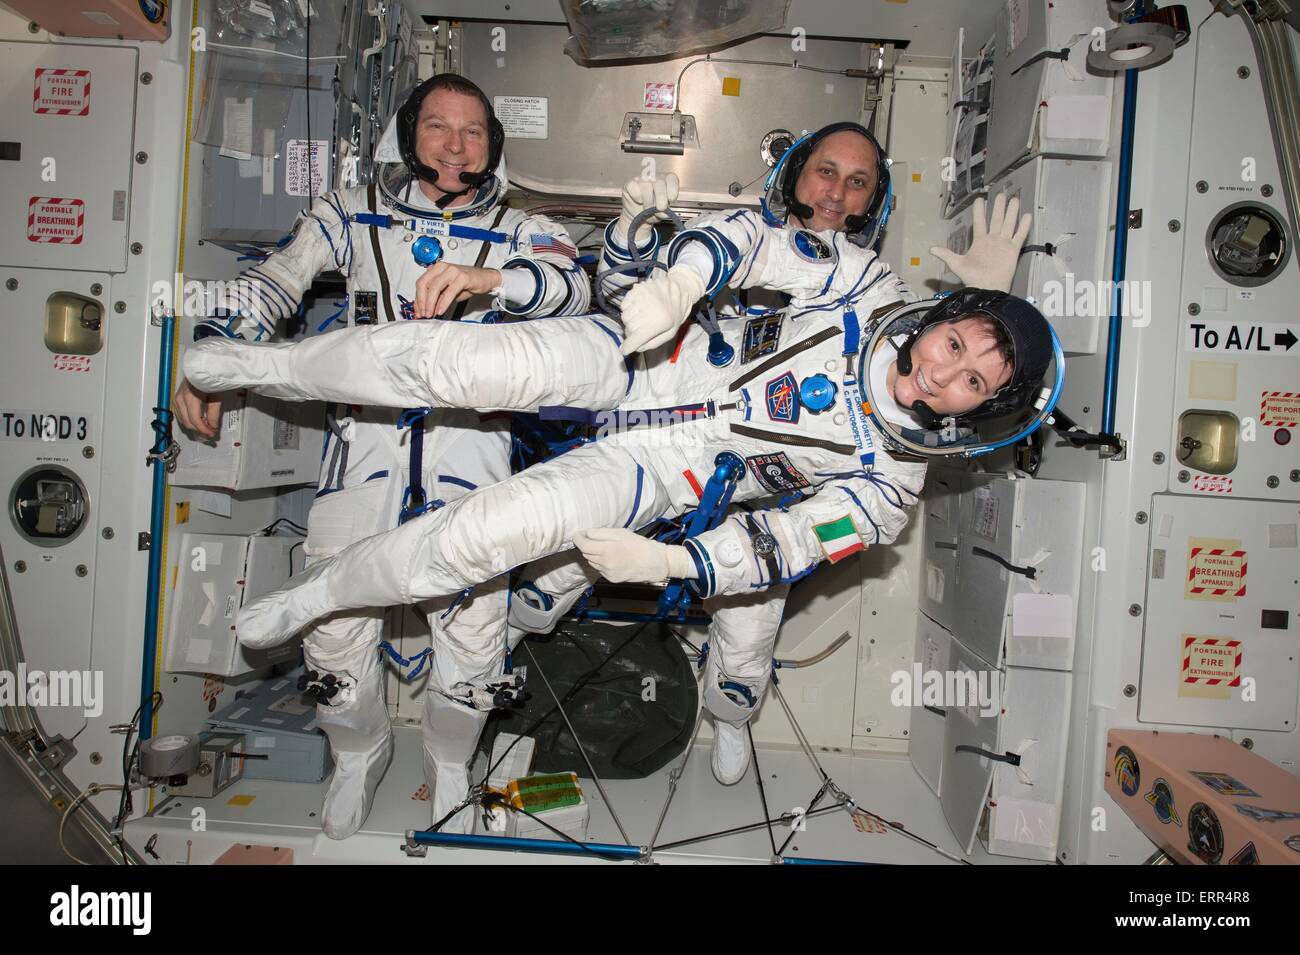 International Space Station Expedition 42 Flight Engineer Samantha Cristoforetti of the European Space Agency floats around fellow NASA astronaut Terry Virts (left) and Russian cosmonaut Anton Shkaplerov as they perform a checkout of their Russian Soyuz spacesuits in preparation for the journey back to Earth May 6, 2015 in Earth Orbit. Stock Photo